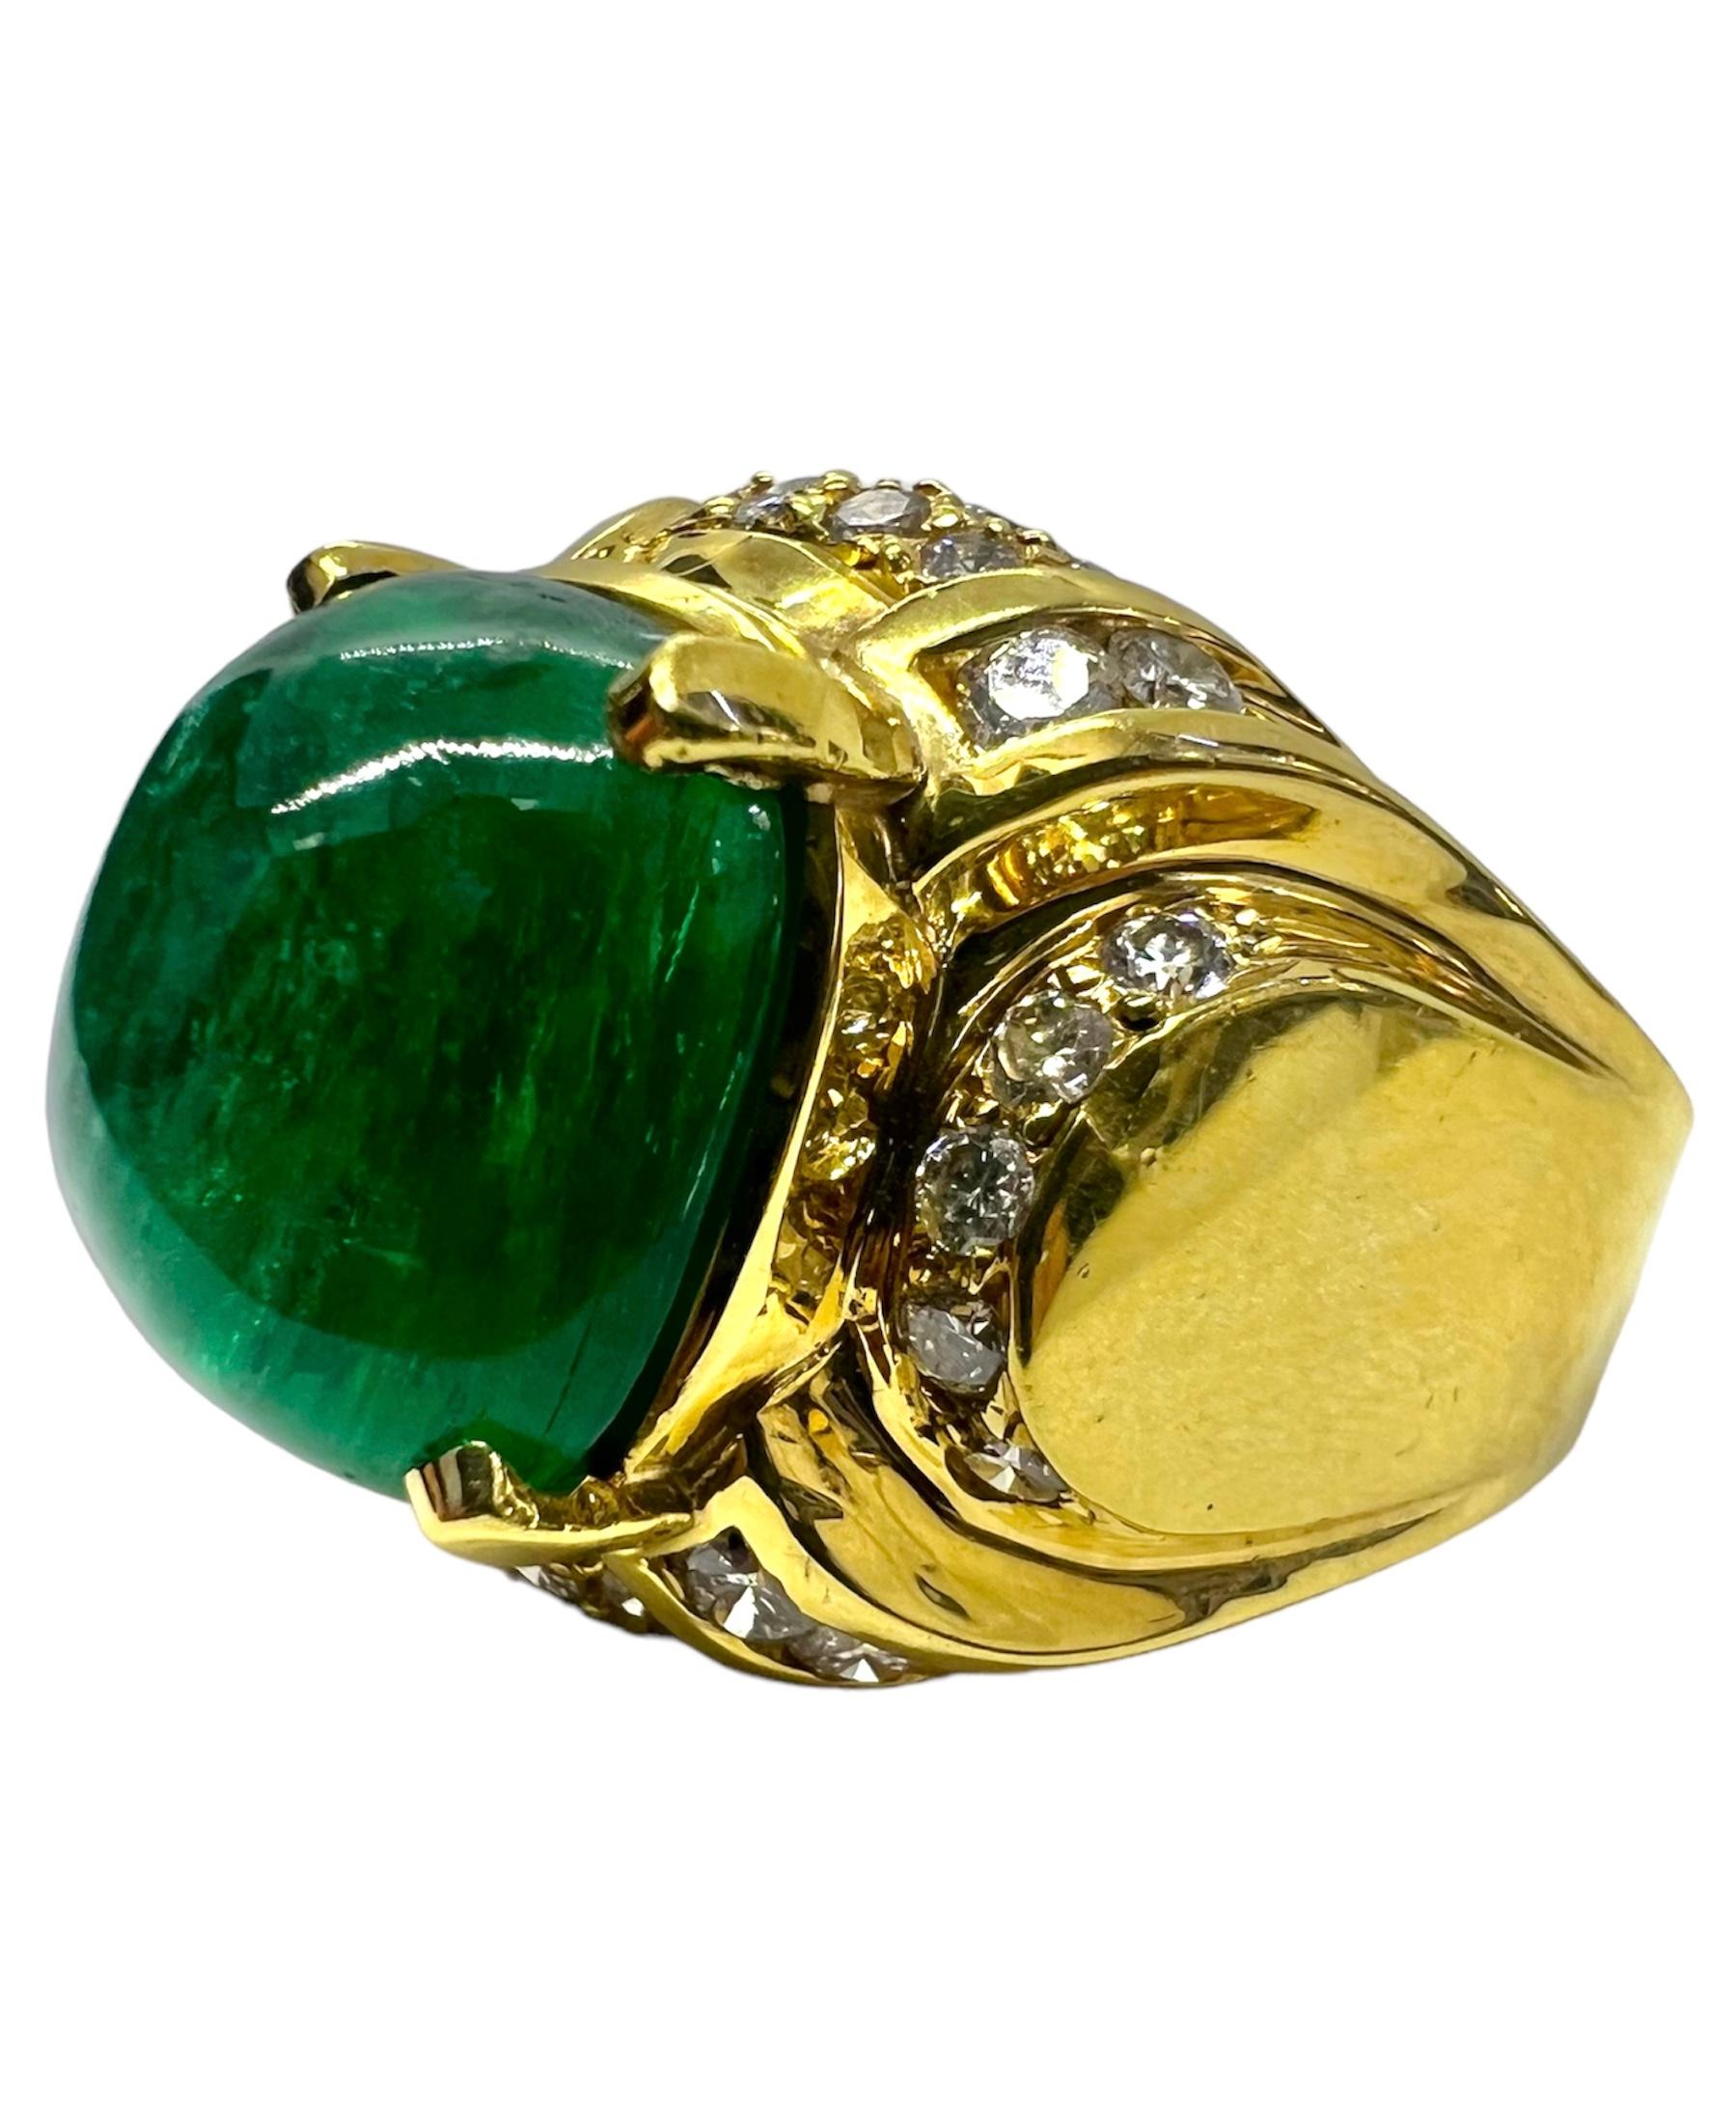 Yellow gold ring with cabochon emerald center stone accented with diamonds.

Sophia D by Joseph Dardashti LTD has been known worldwide for 35 years and are inspired by classic Art Deco design that merges with modern manufacturing techniques.